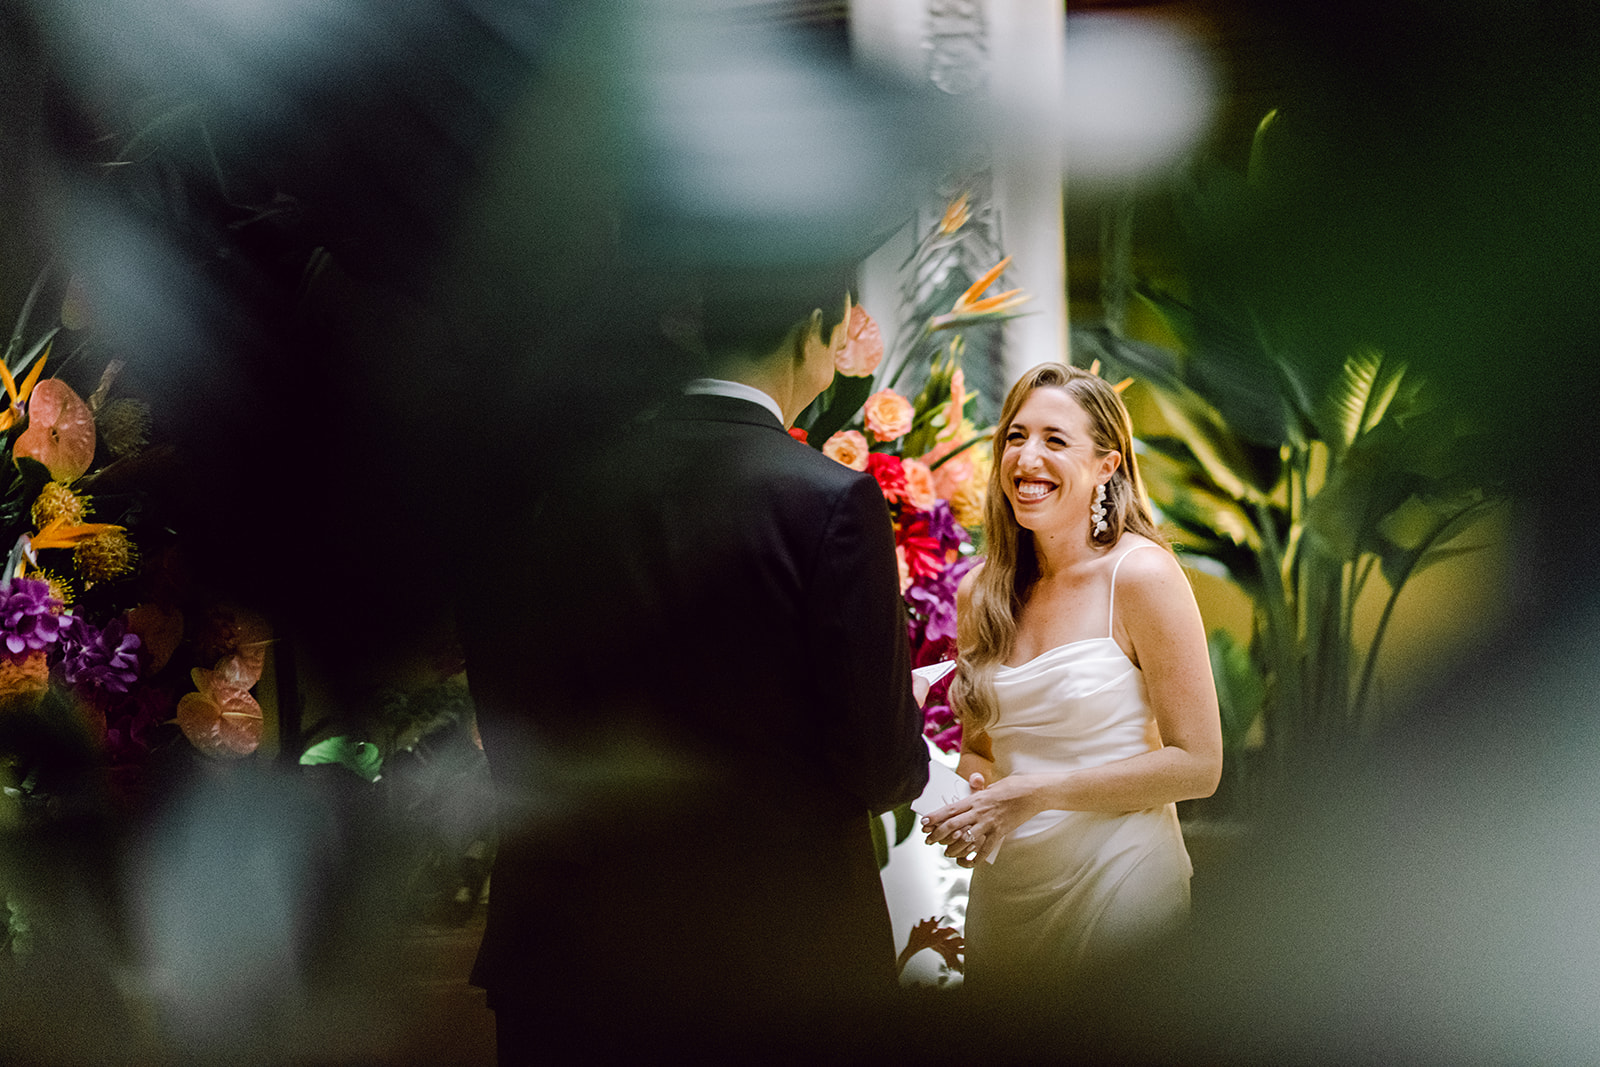 Bride smiles at groom reading vows during ceremony at Mayfair House Hotel & Garden in Miami on wedding day.